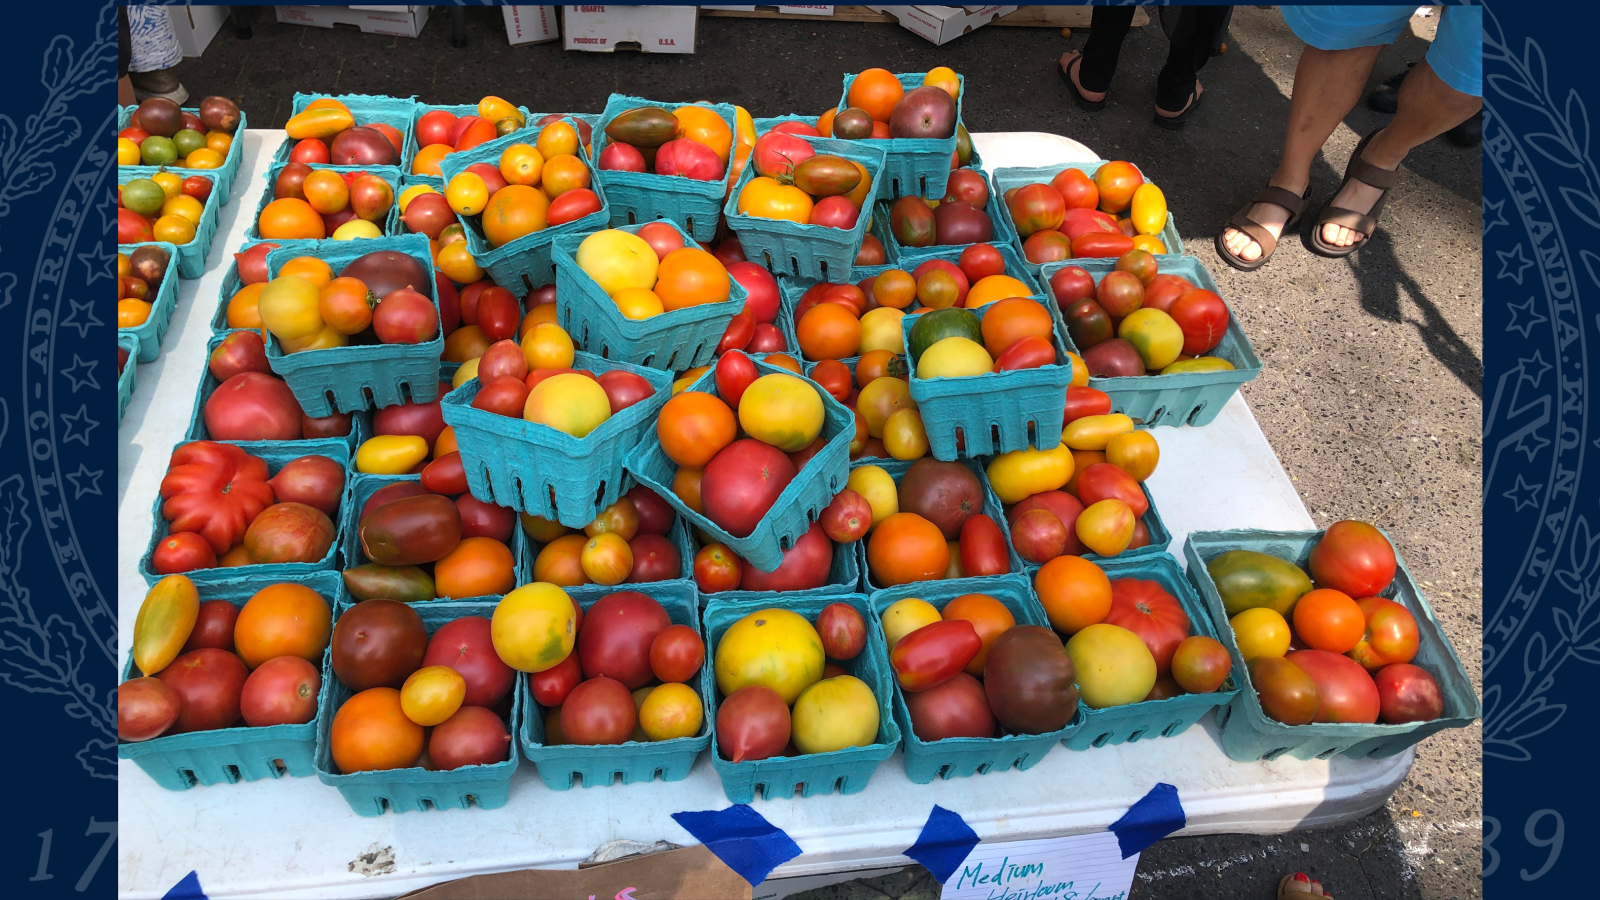 Bright yellow, orange, and red tomatoes in green containers at the farmers market.